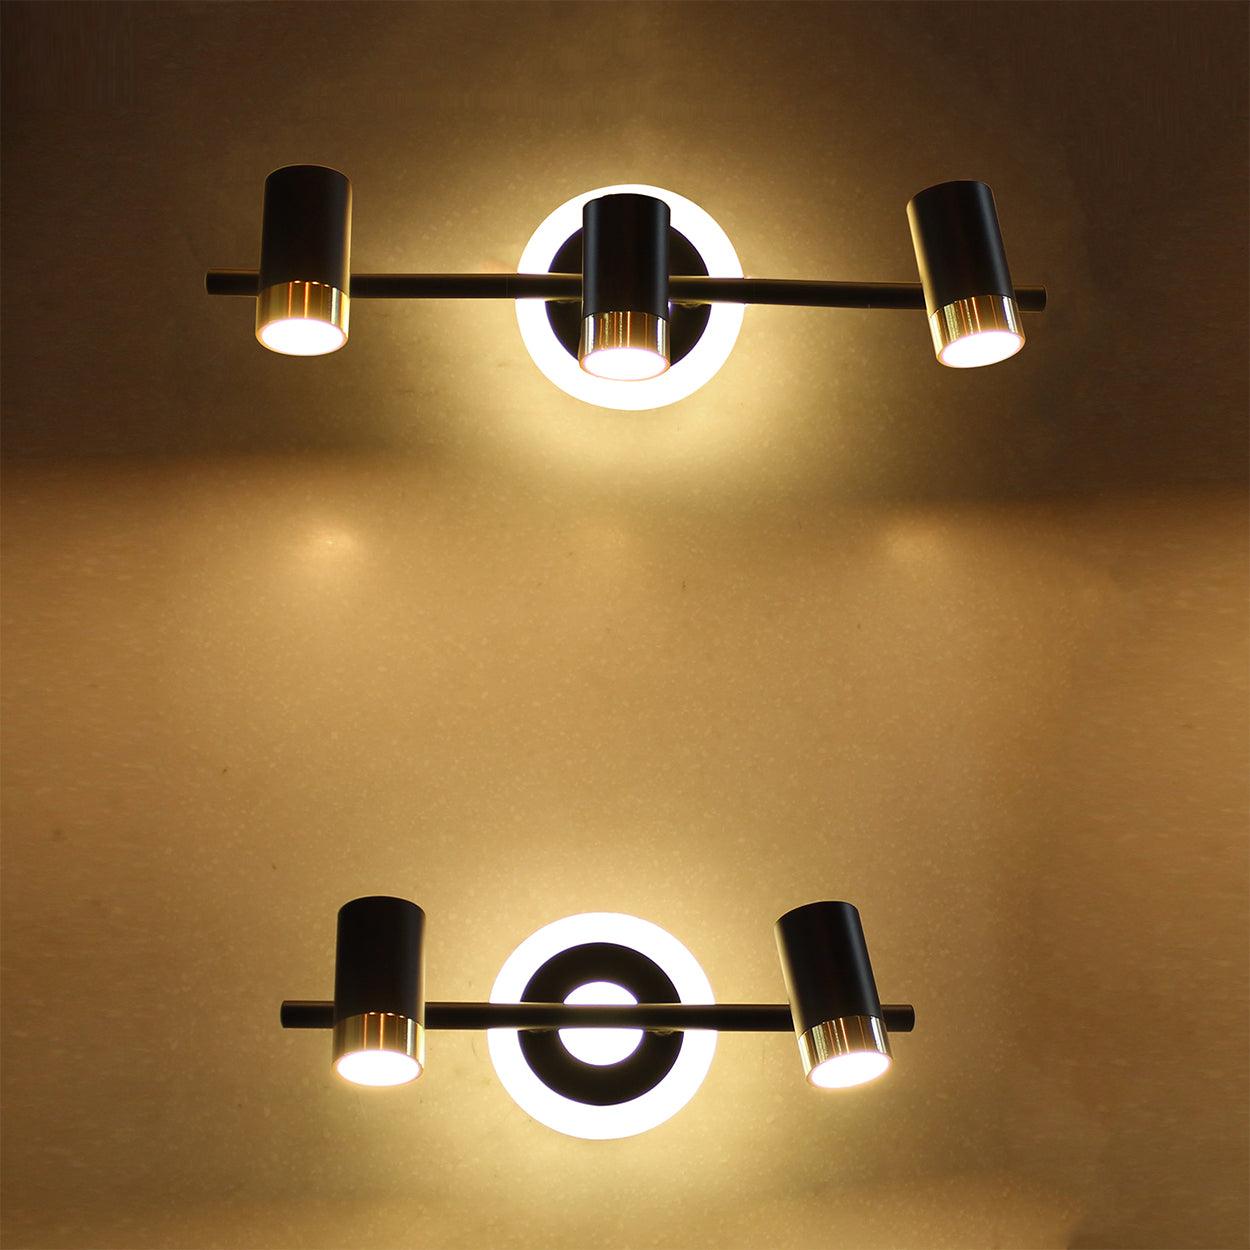 ANKUR CILINDRO LED MIRROR PICTURE WALL LIGHT - Ankur Lighting